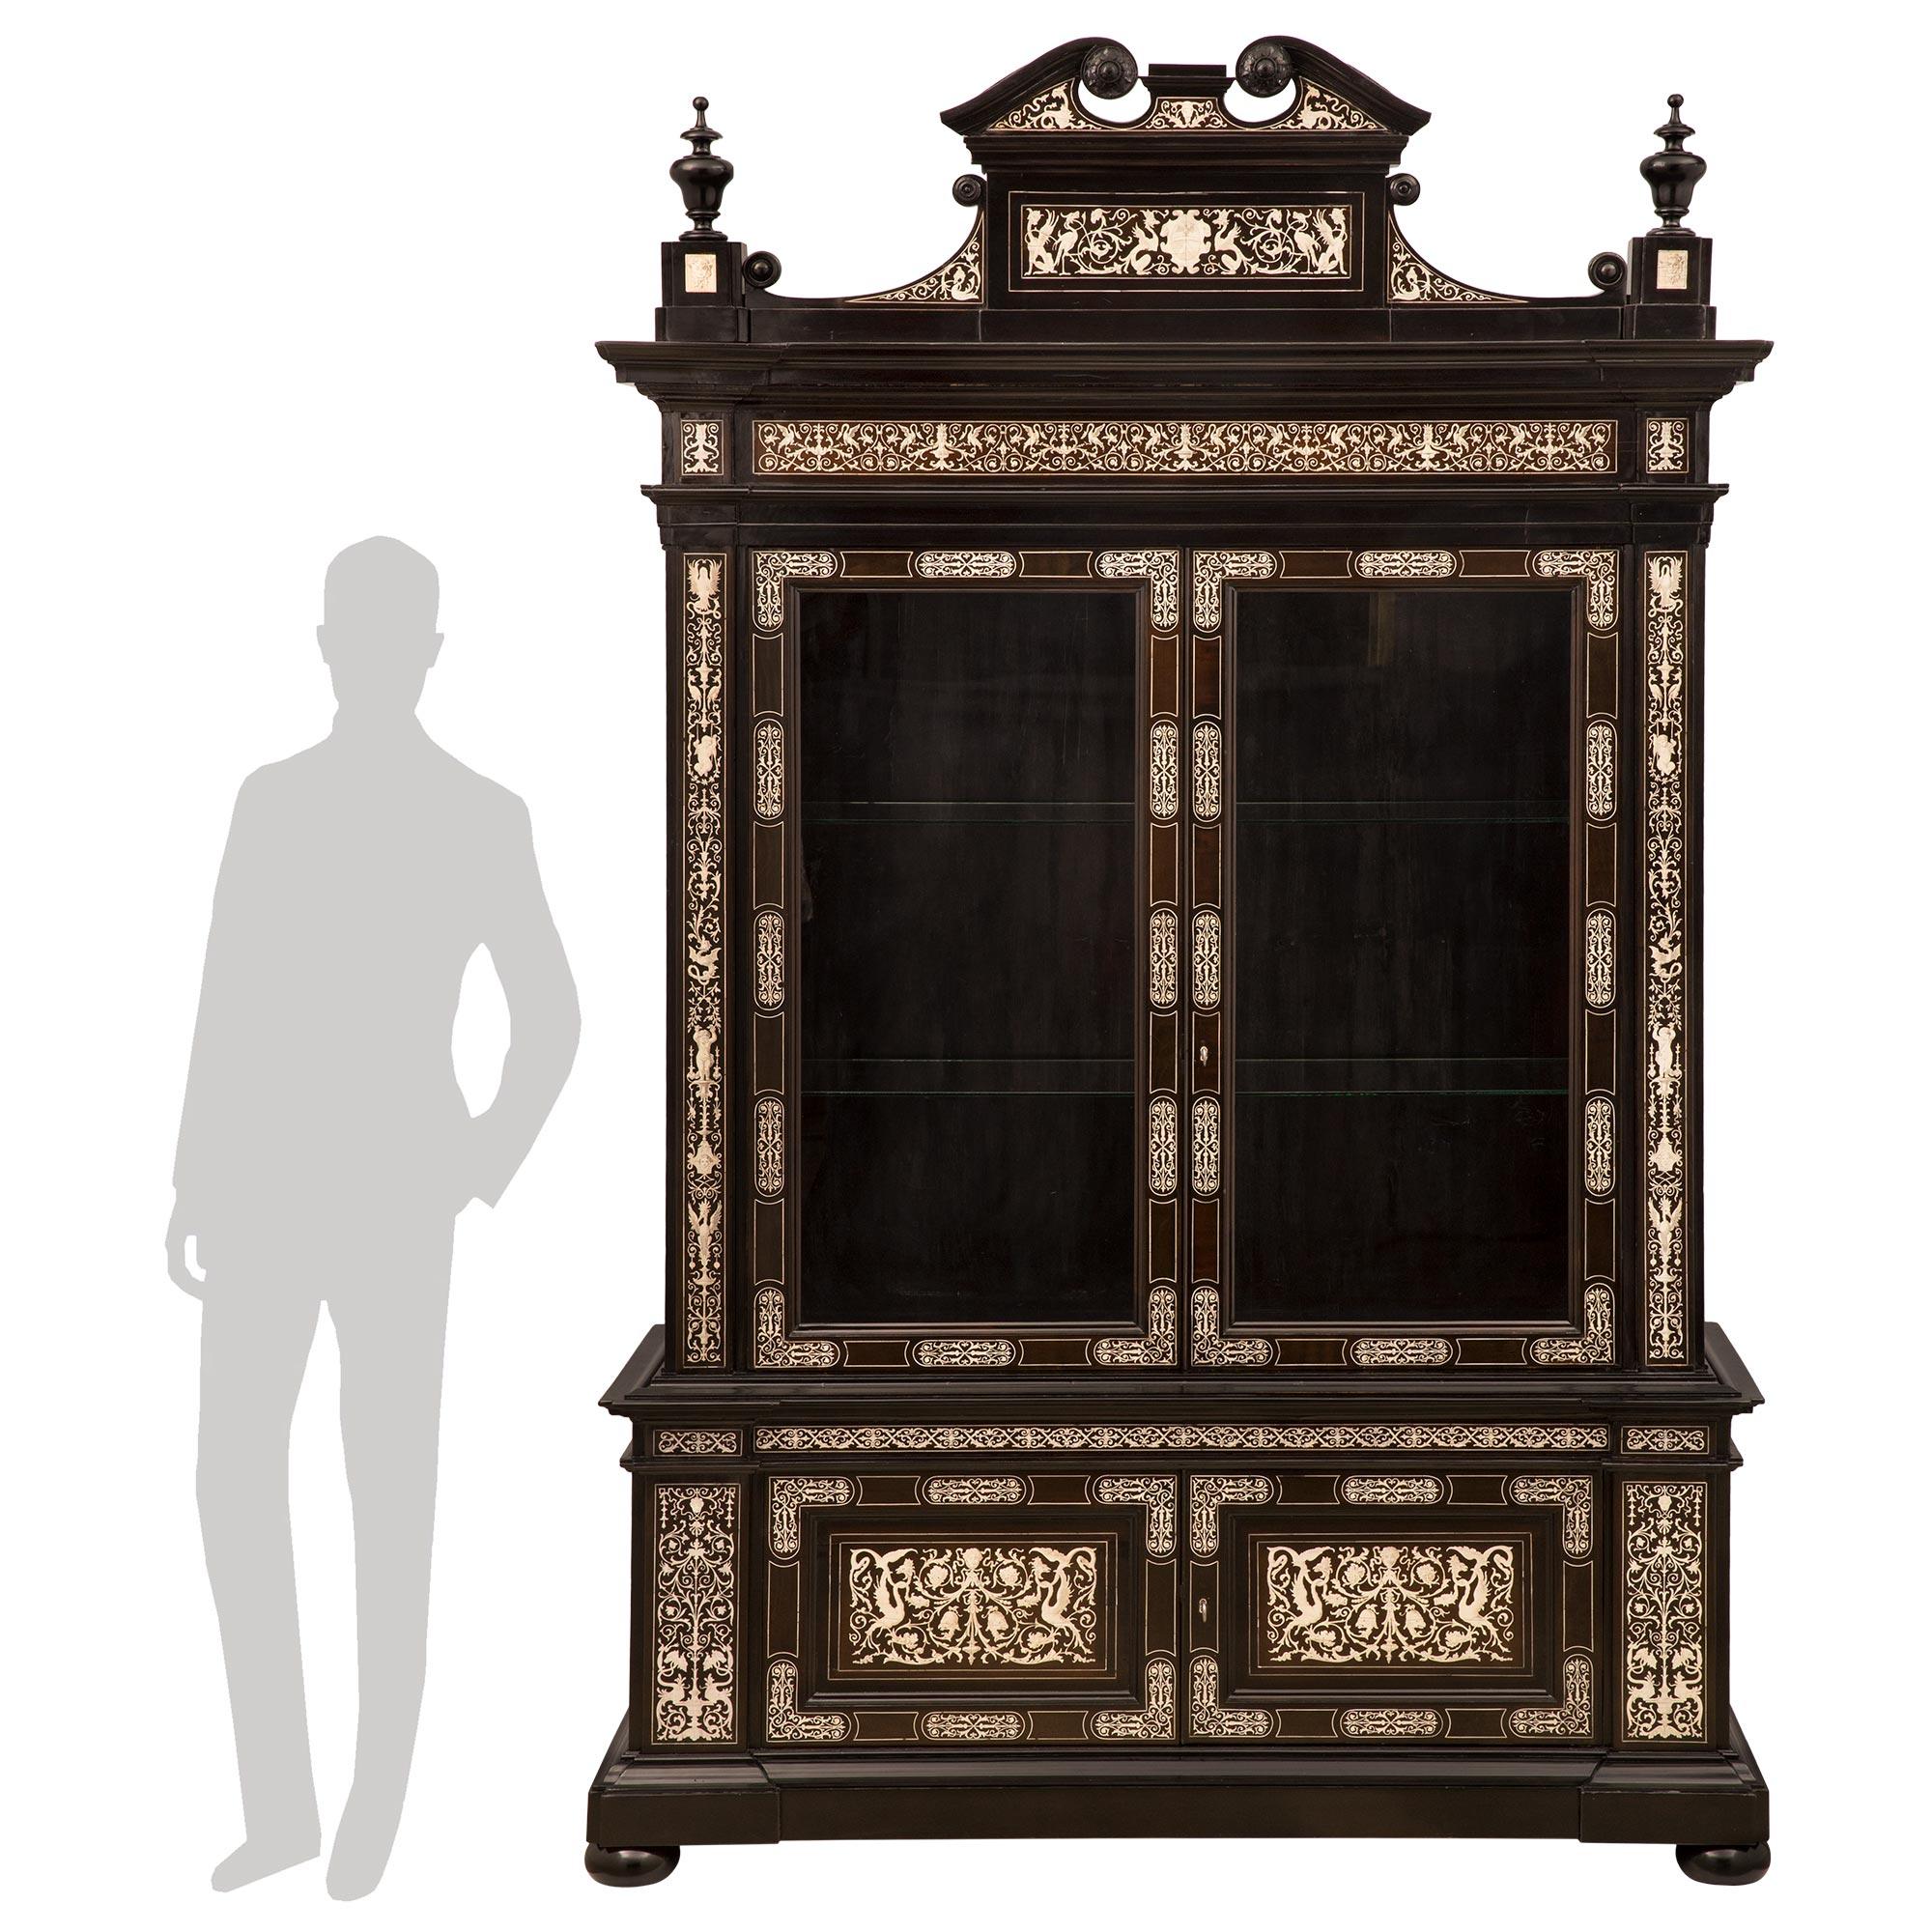 A stunning and large scale Italian 19th century Milanese st. ebony and bone cabinet vitrine. The impressive four door vitrine is raised by fine bun feet below the straight frieze with an elegant mottled band. The base displays two doors decorated